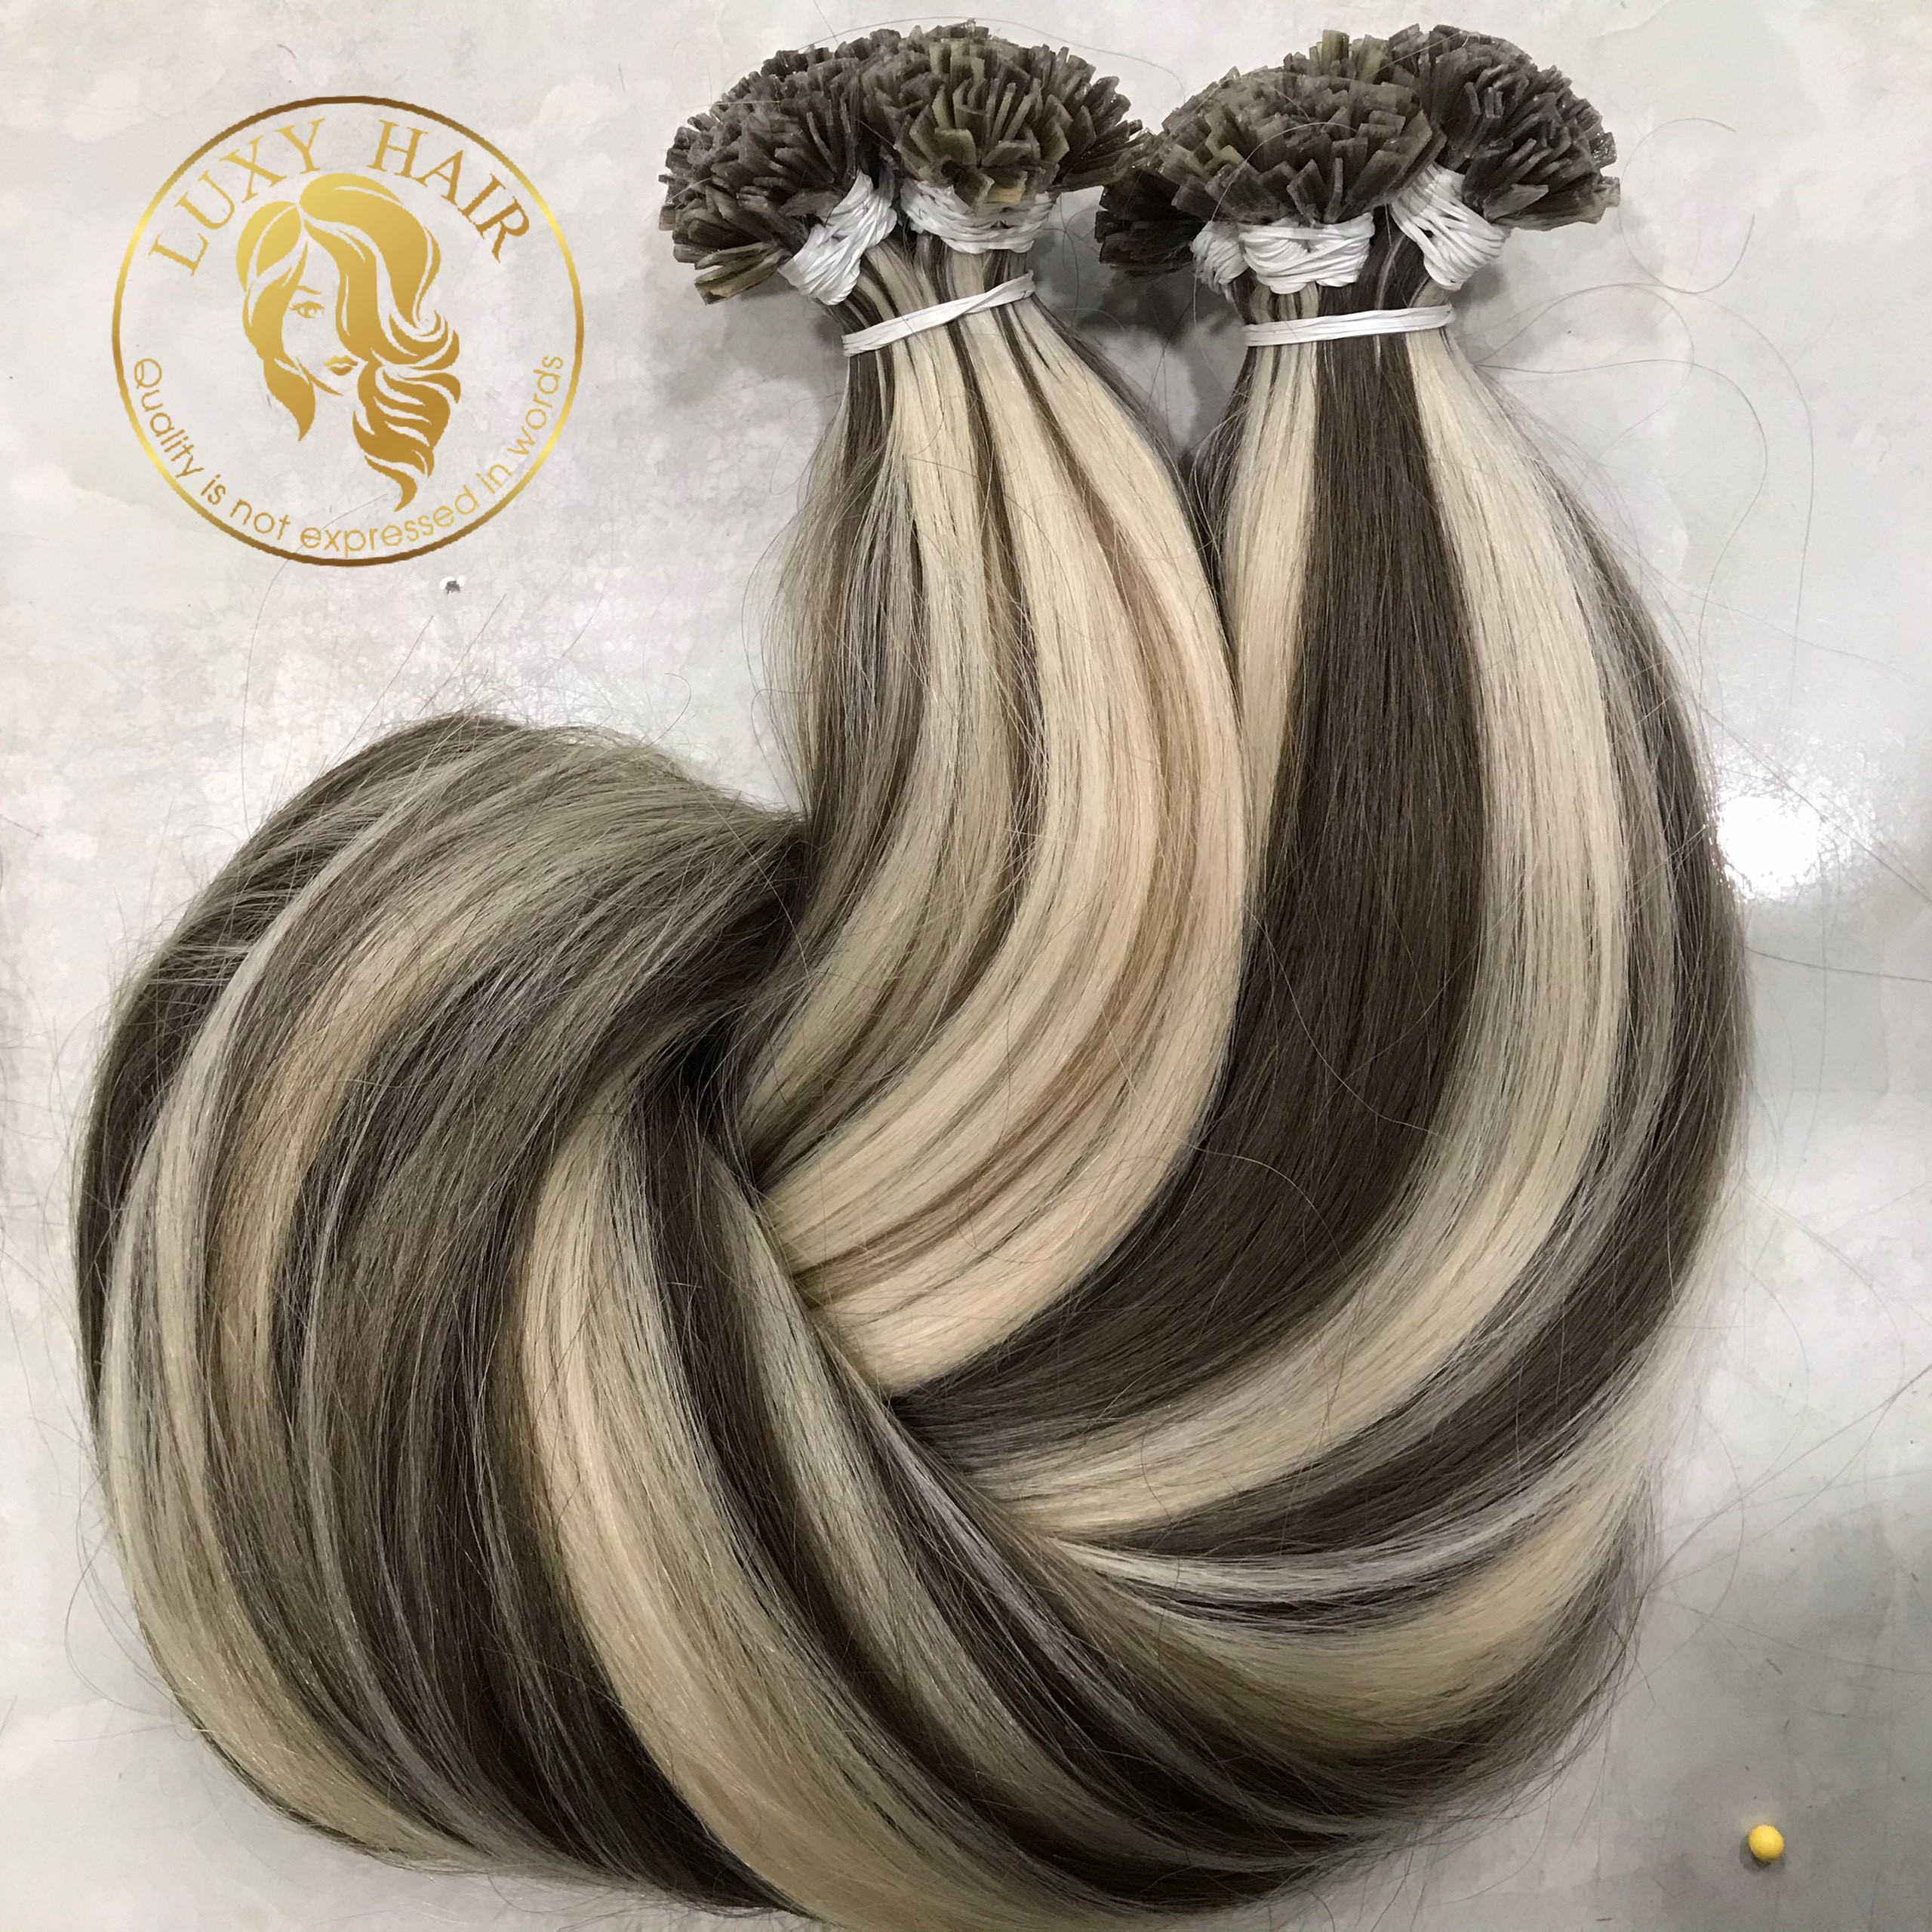 Get Best Human Hair Wig Bundles in Vietnam. the best quality and wholesale human hair supplier in Vietnam. LuxyHair supply hair to all customers all over the world